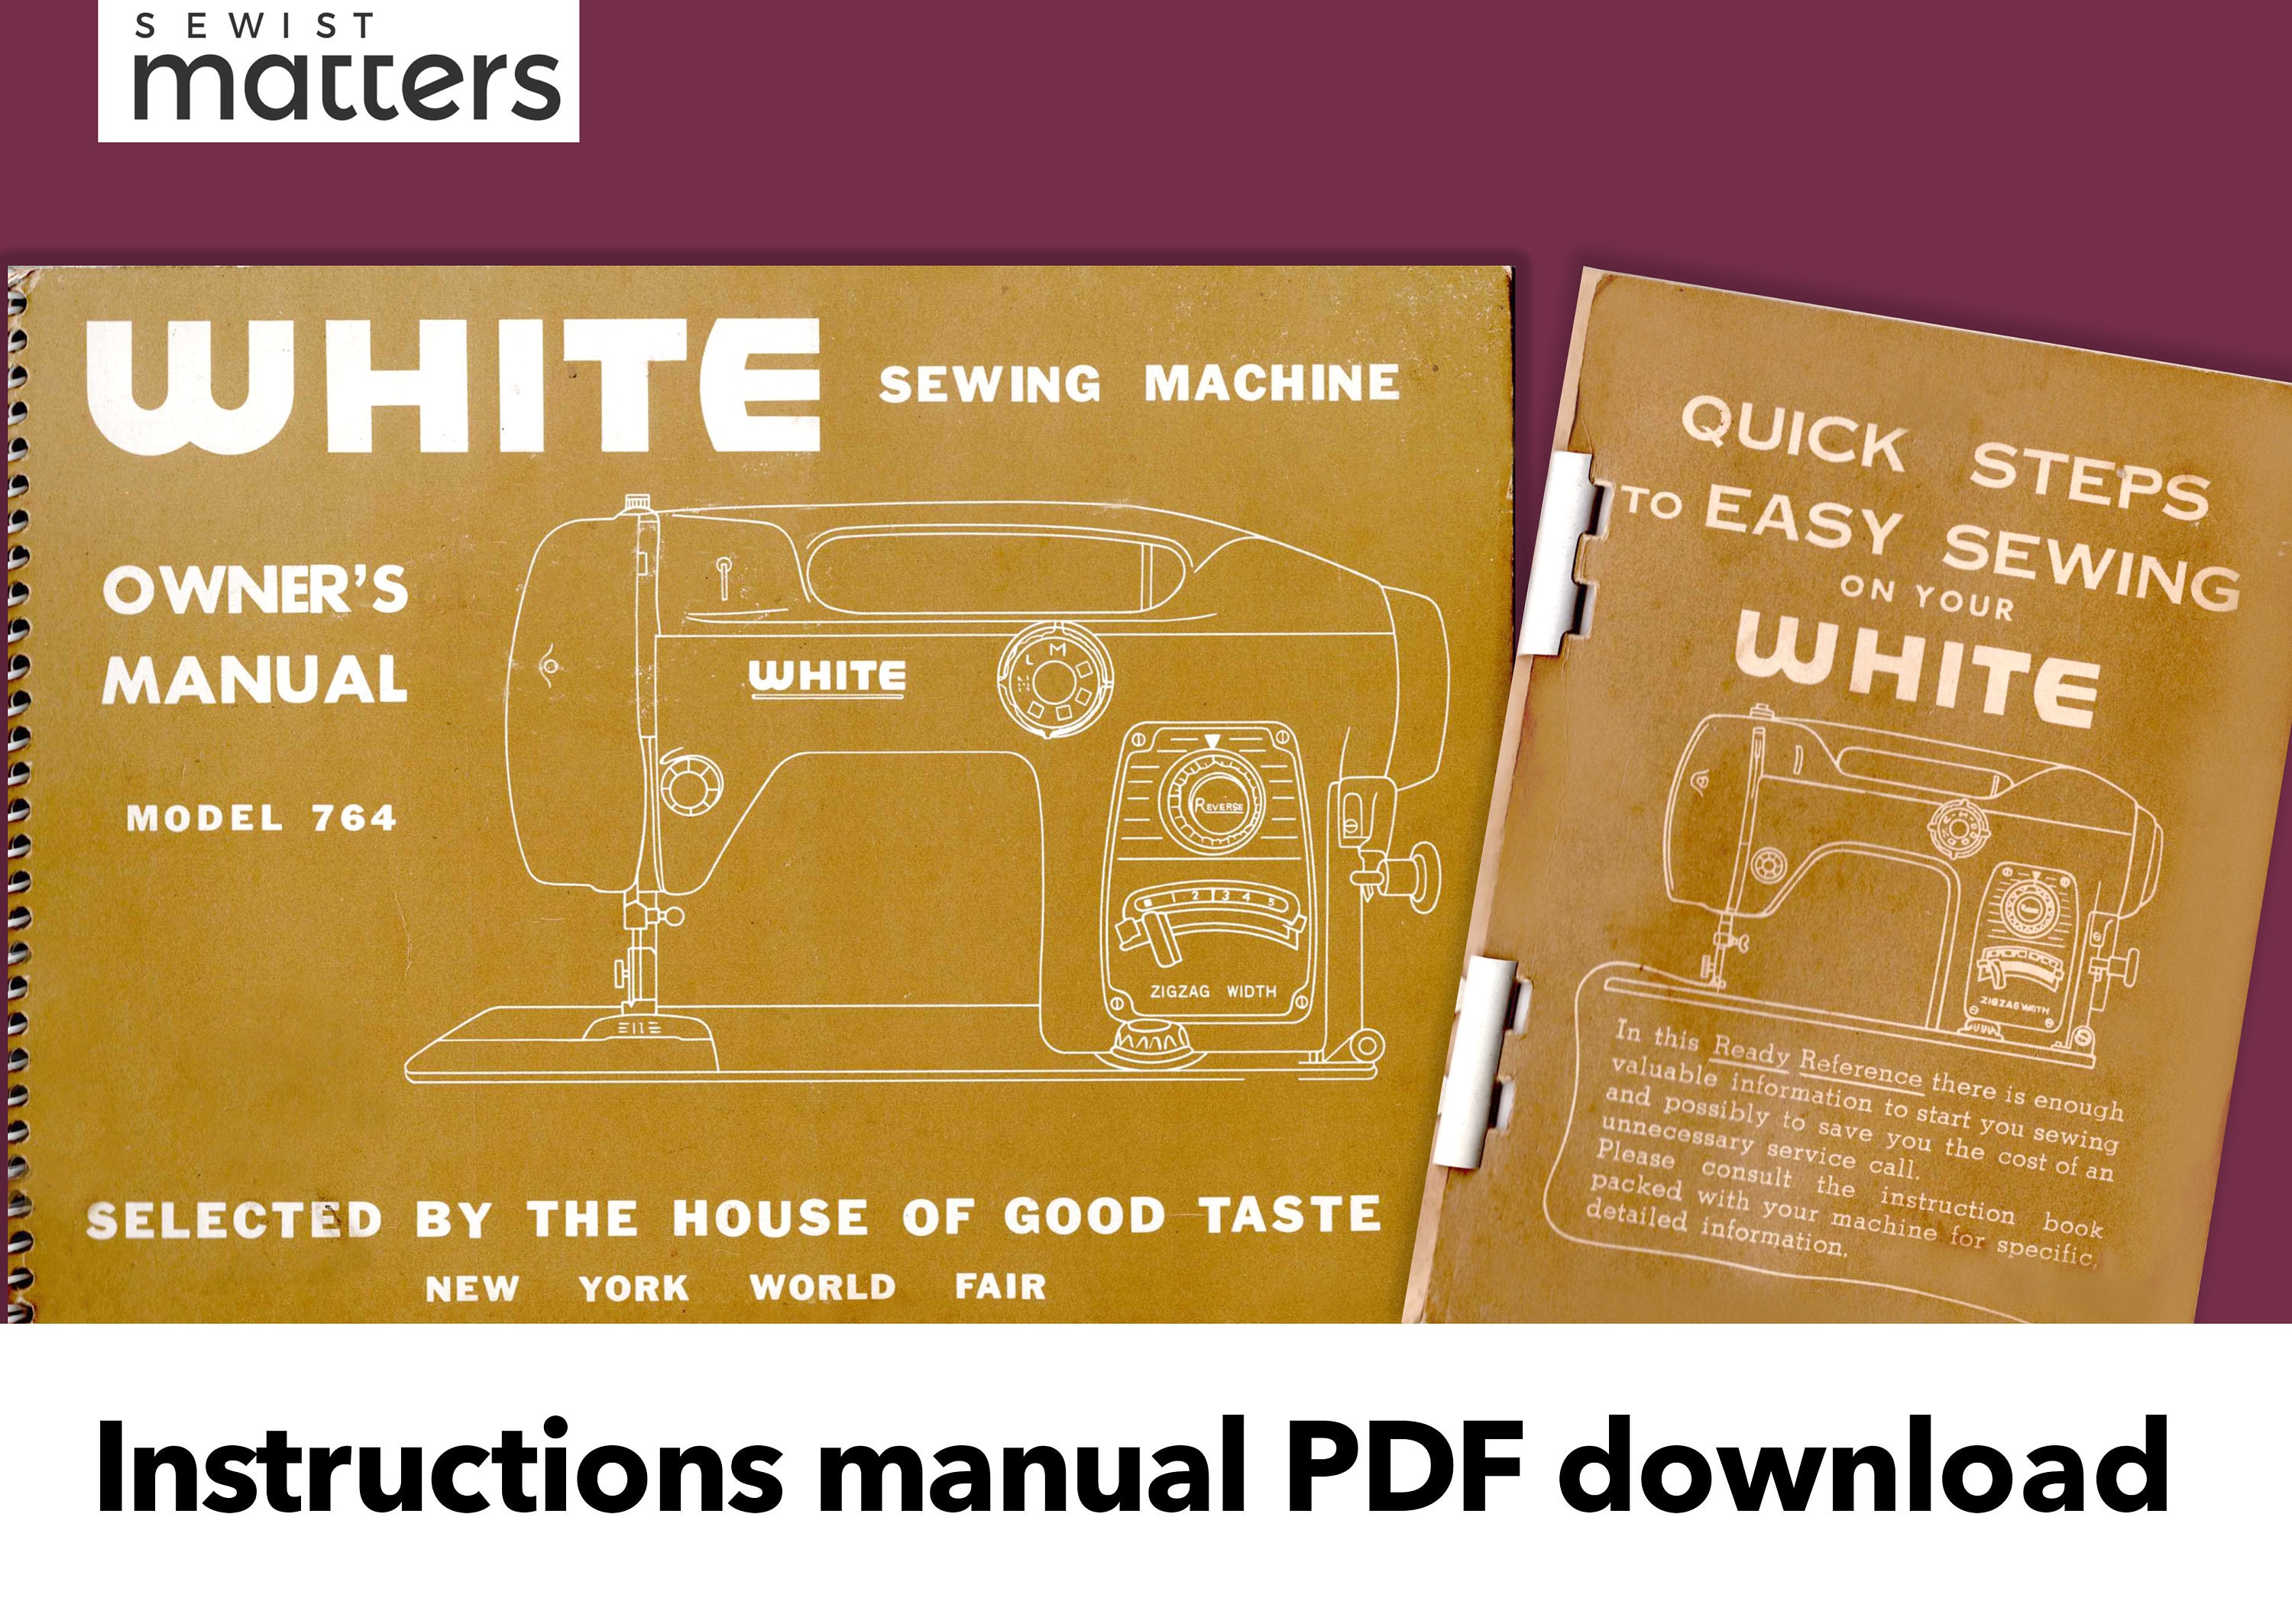 White 764 Quick Steps to Easy Sewing on Your White Machine Instruction  Manual PDF Download 